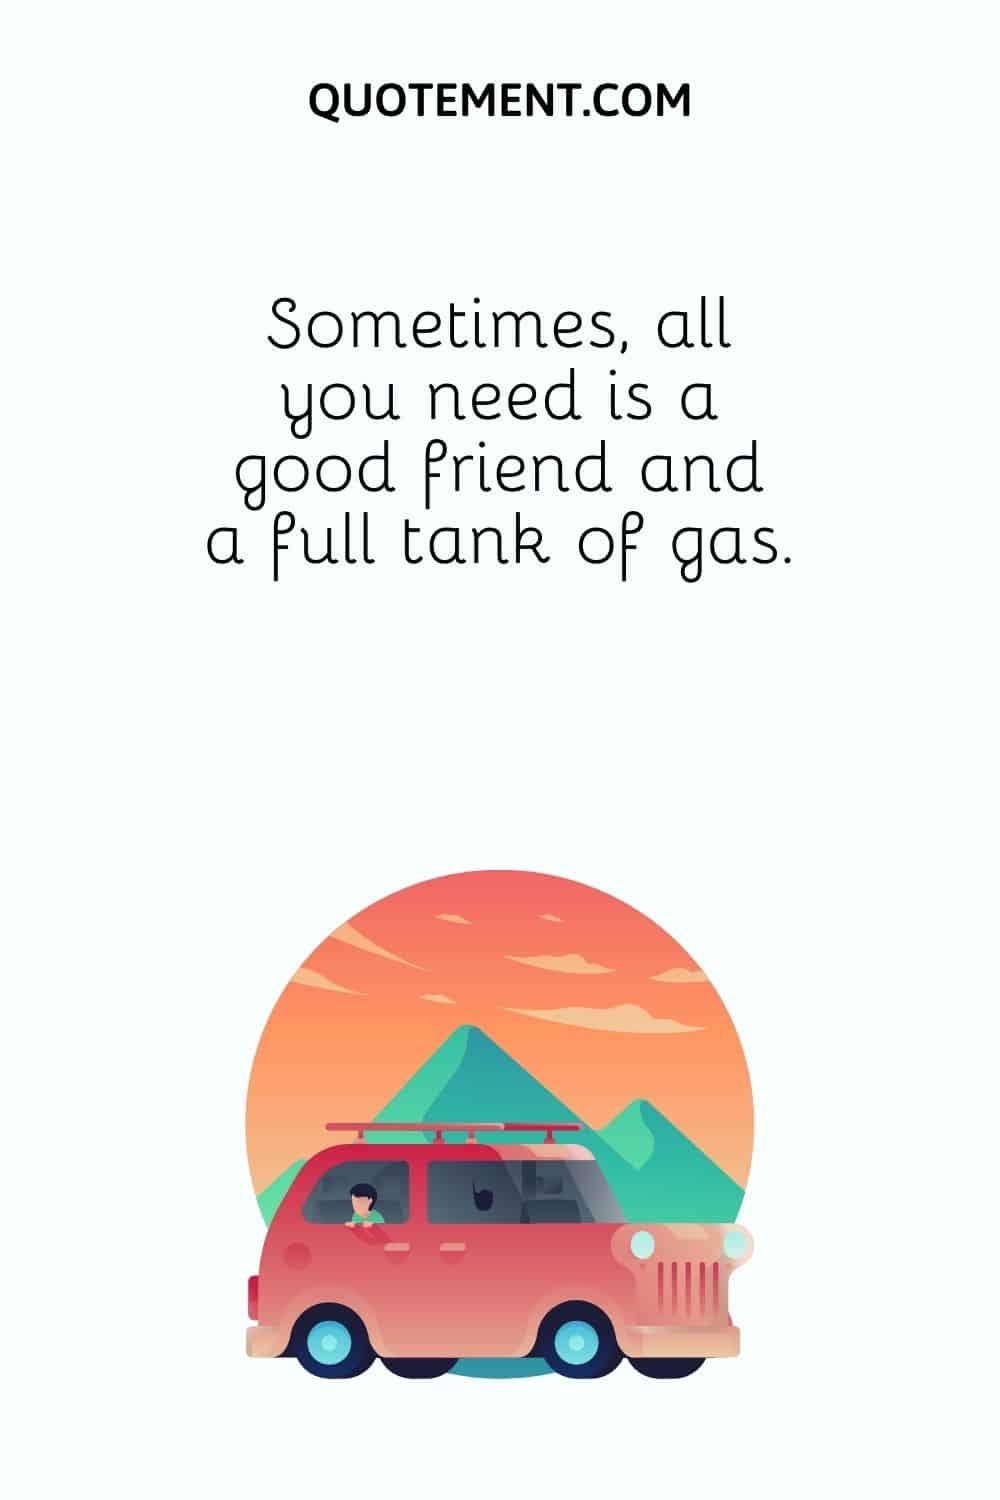 all you need is a good friend and a full tank of gas